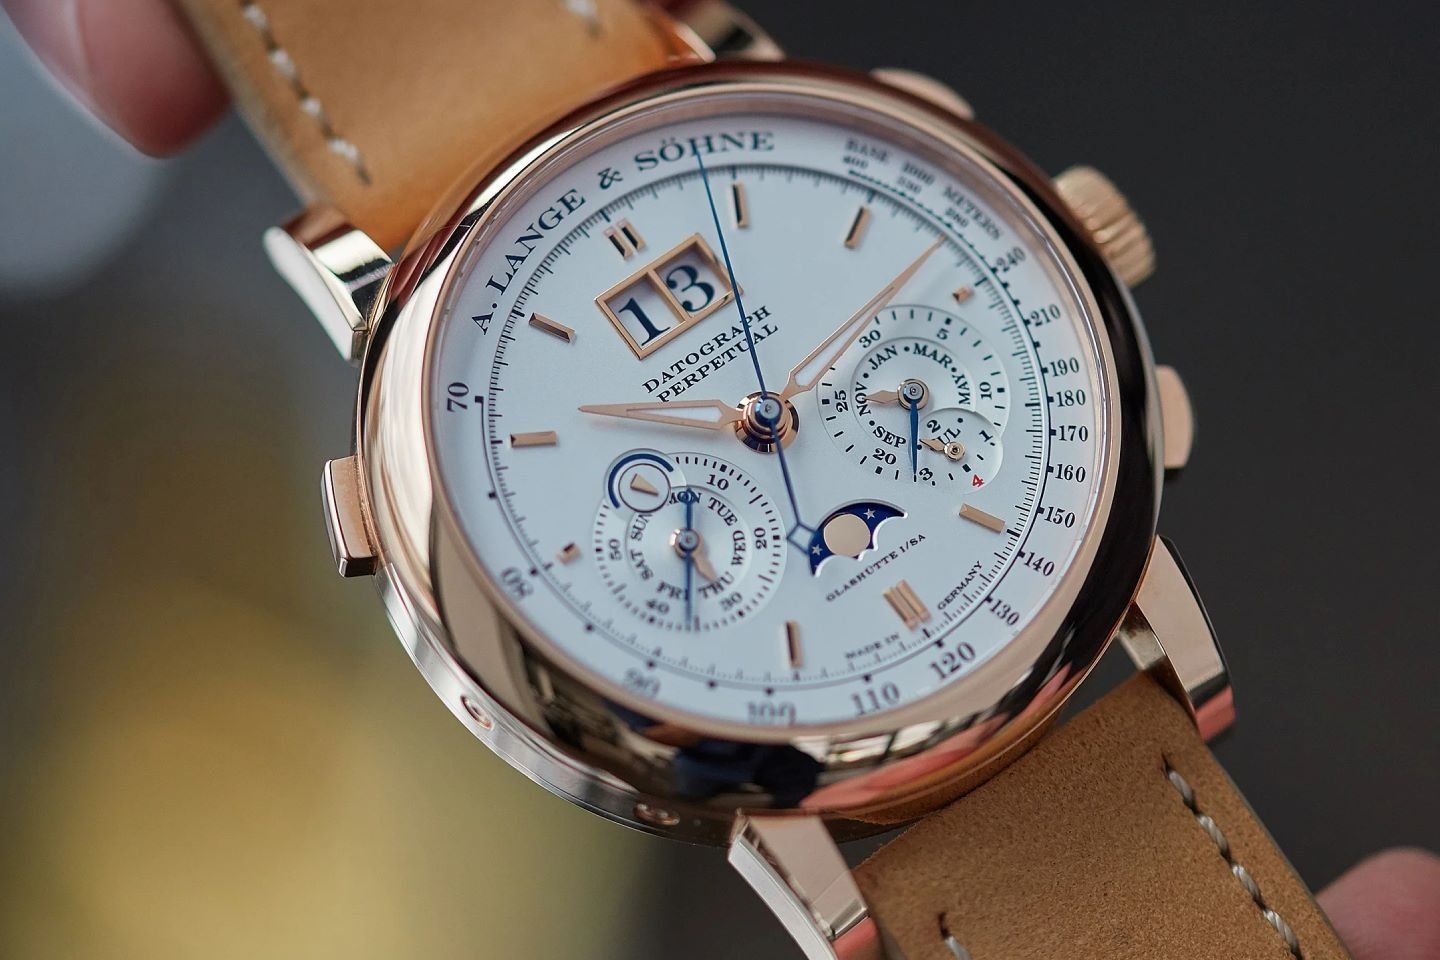 The Datograph Perpetual is the first Lange wristwatch to feature a chronograph and a perpetual calendar